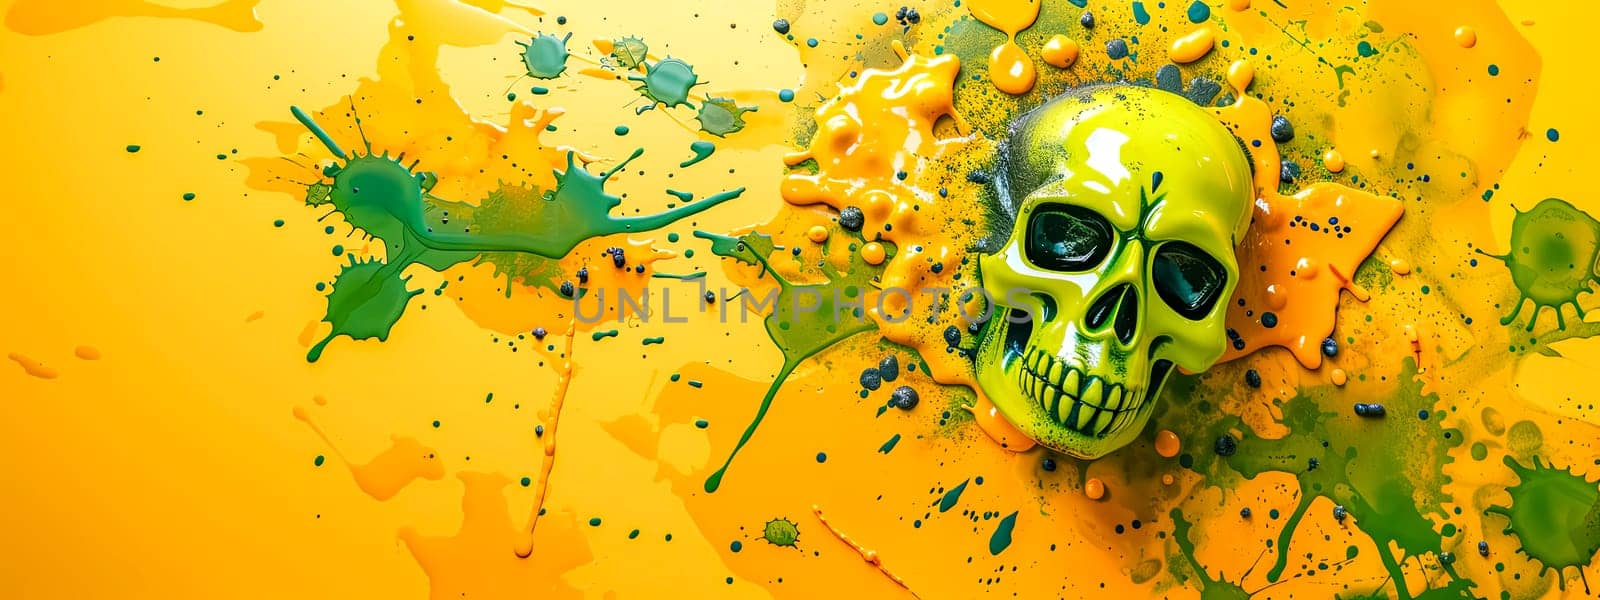 Neon Green Skull Splashed with Vivid Yellow Paint by Edophoto